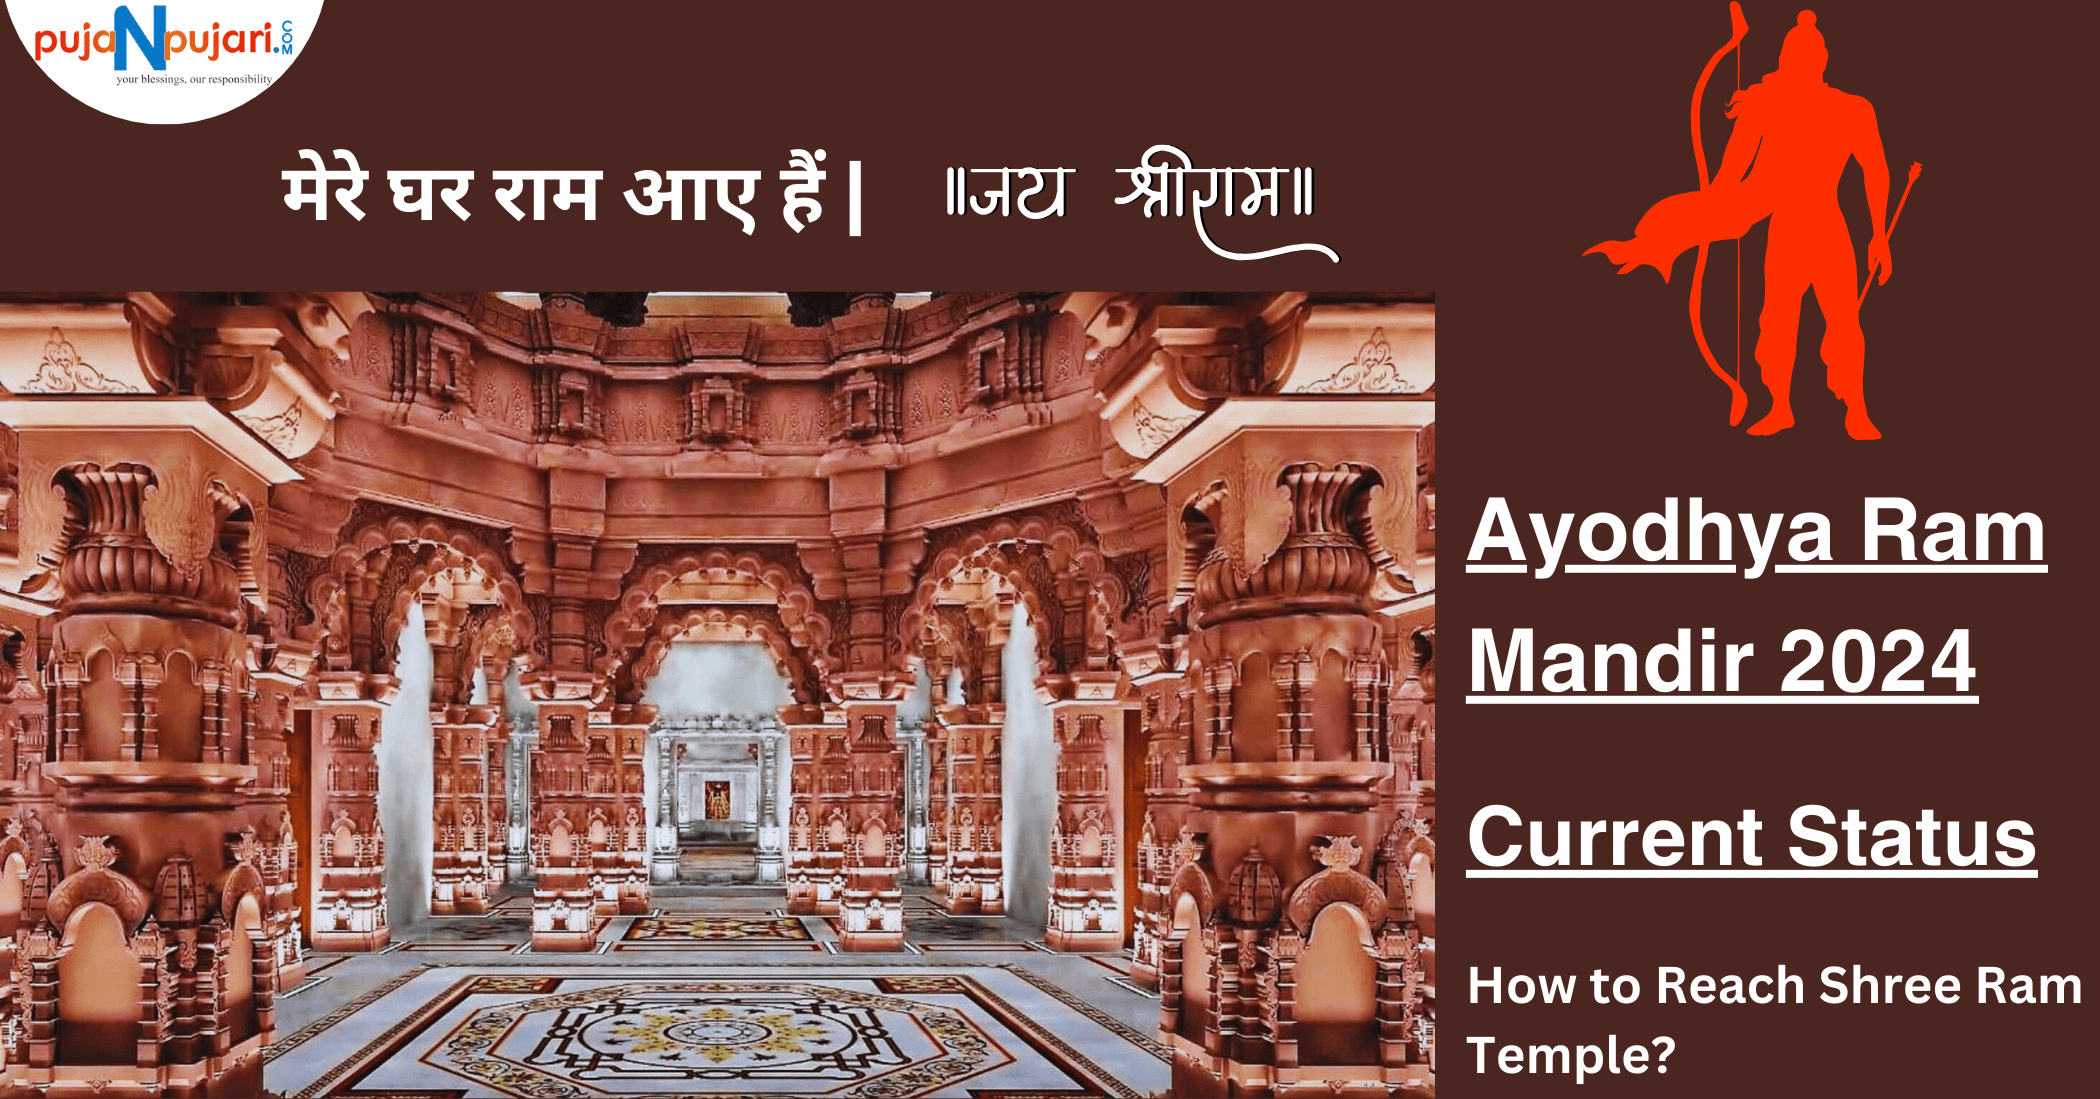 Ayodhya Ram Mandir 2024: History, Architecture, Significance, and How to reach the Lord Ram Temple